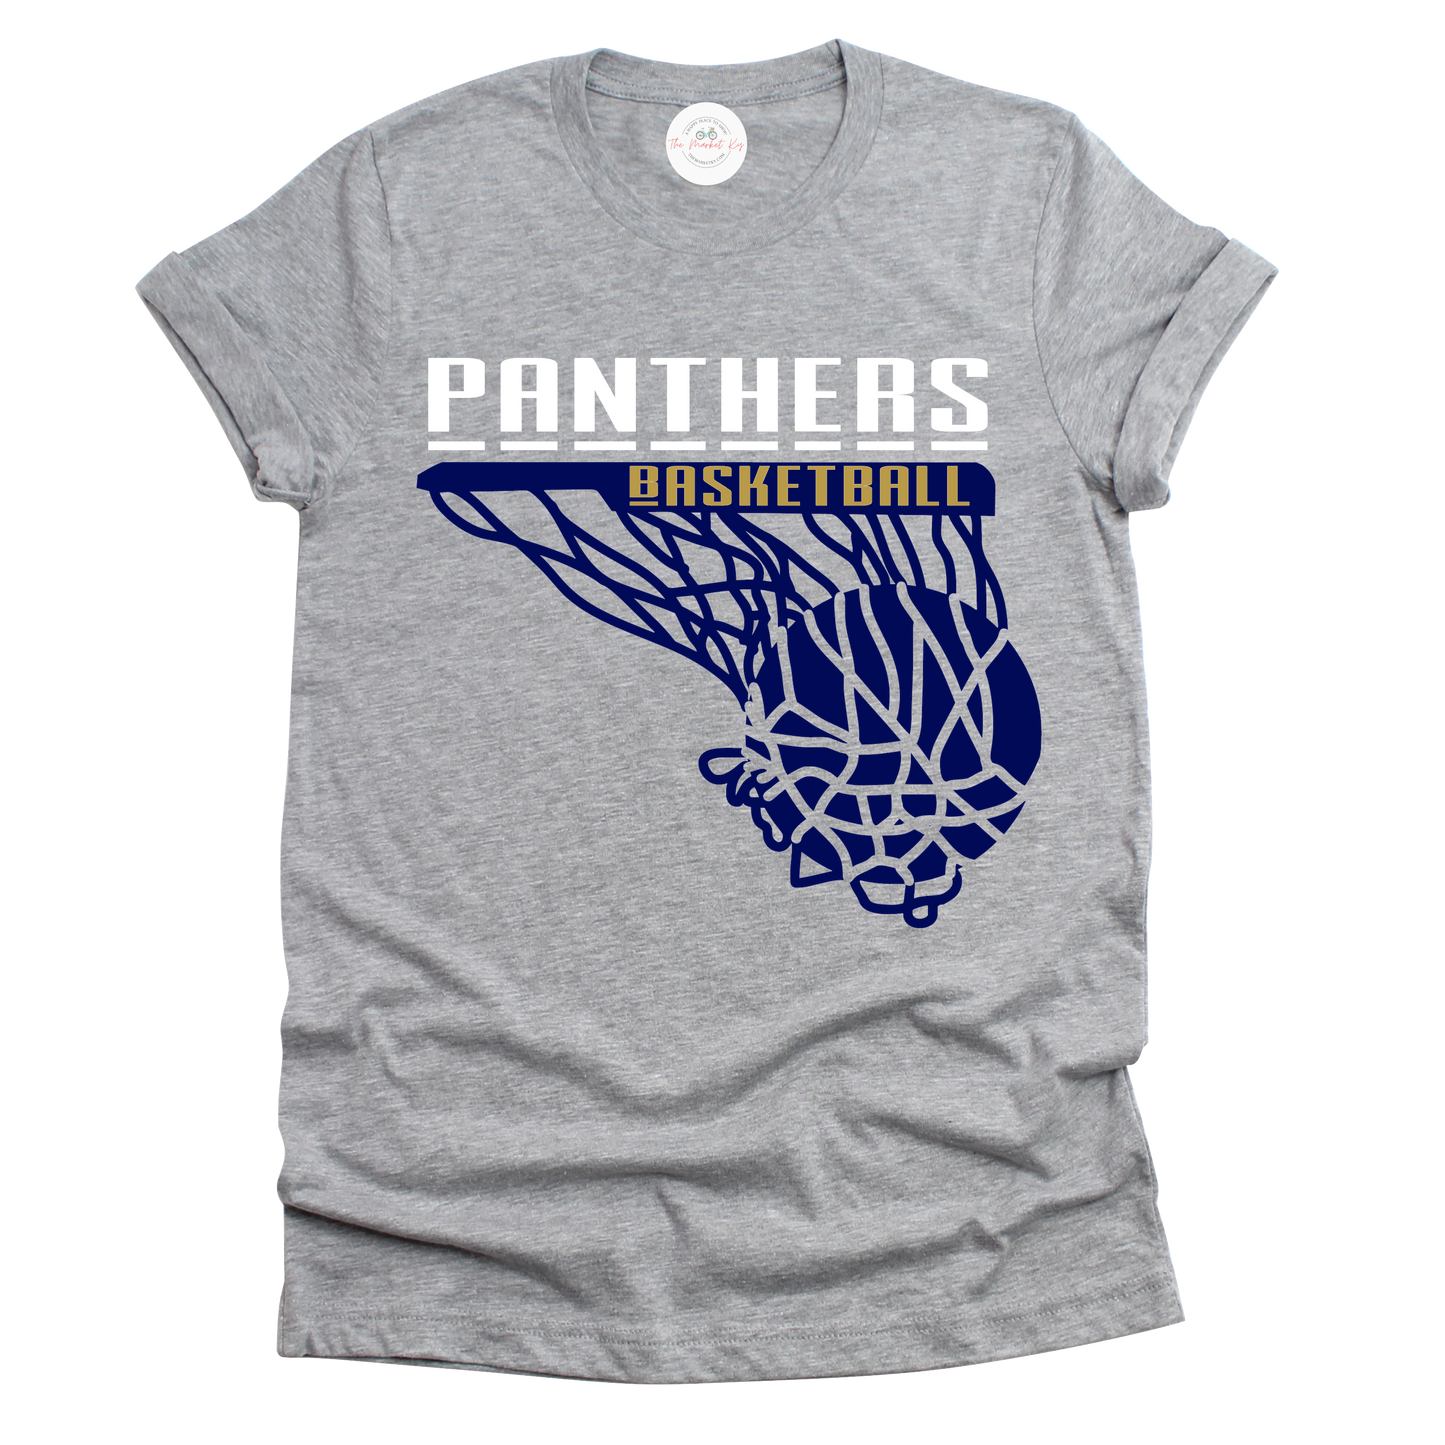 Nothing But Net-Panthers